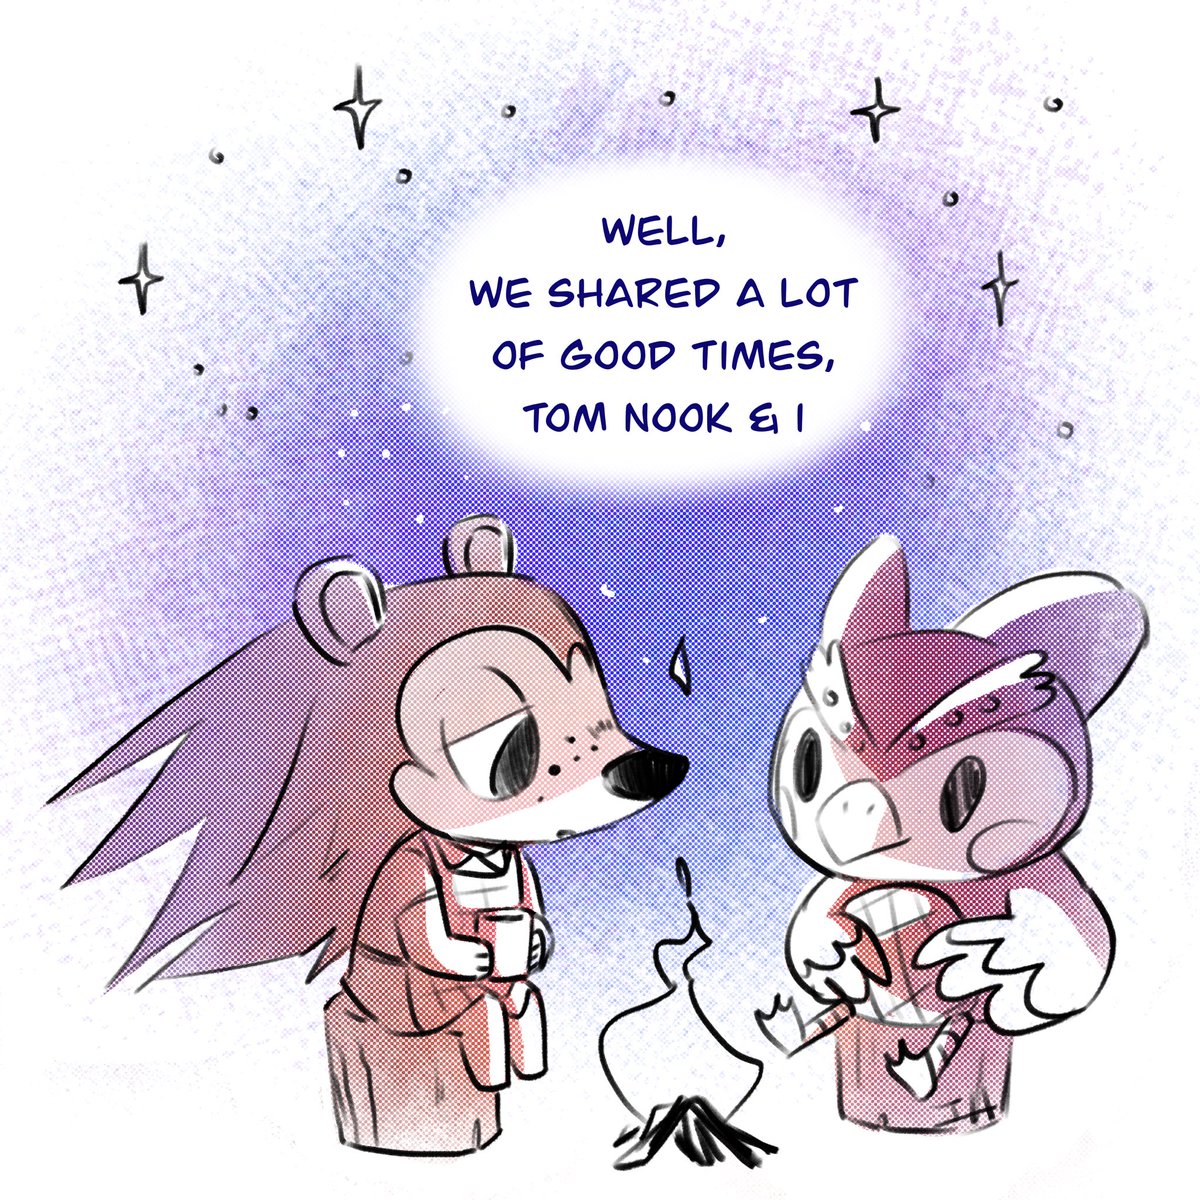 Sable, Tom Nook, and Stars (1/4) #acnh 